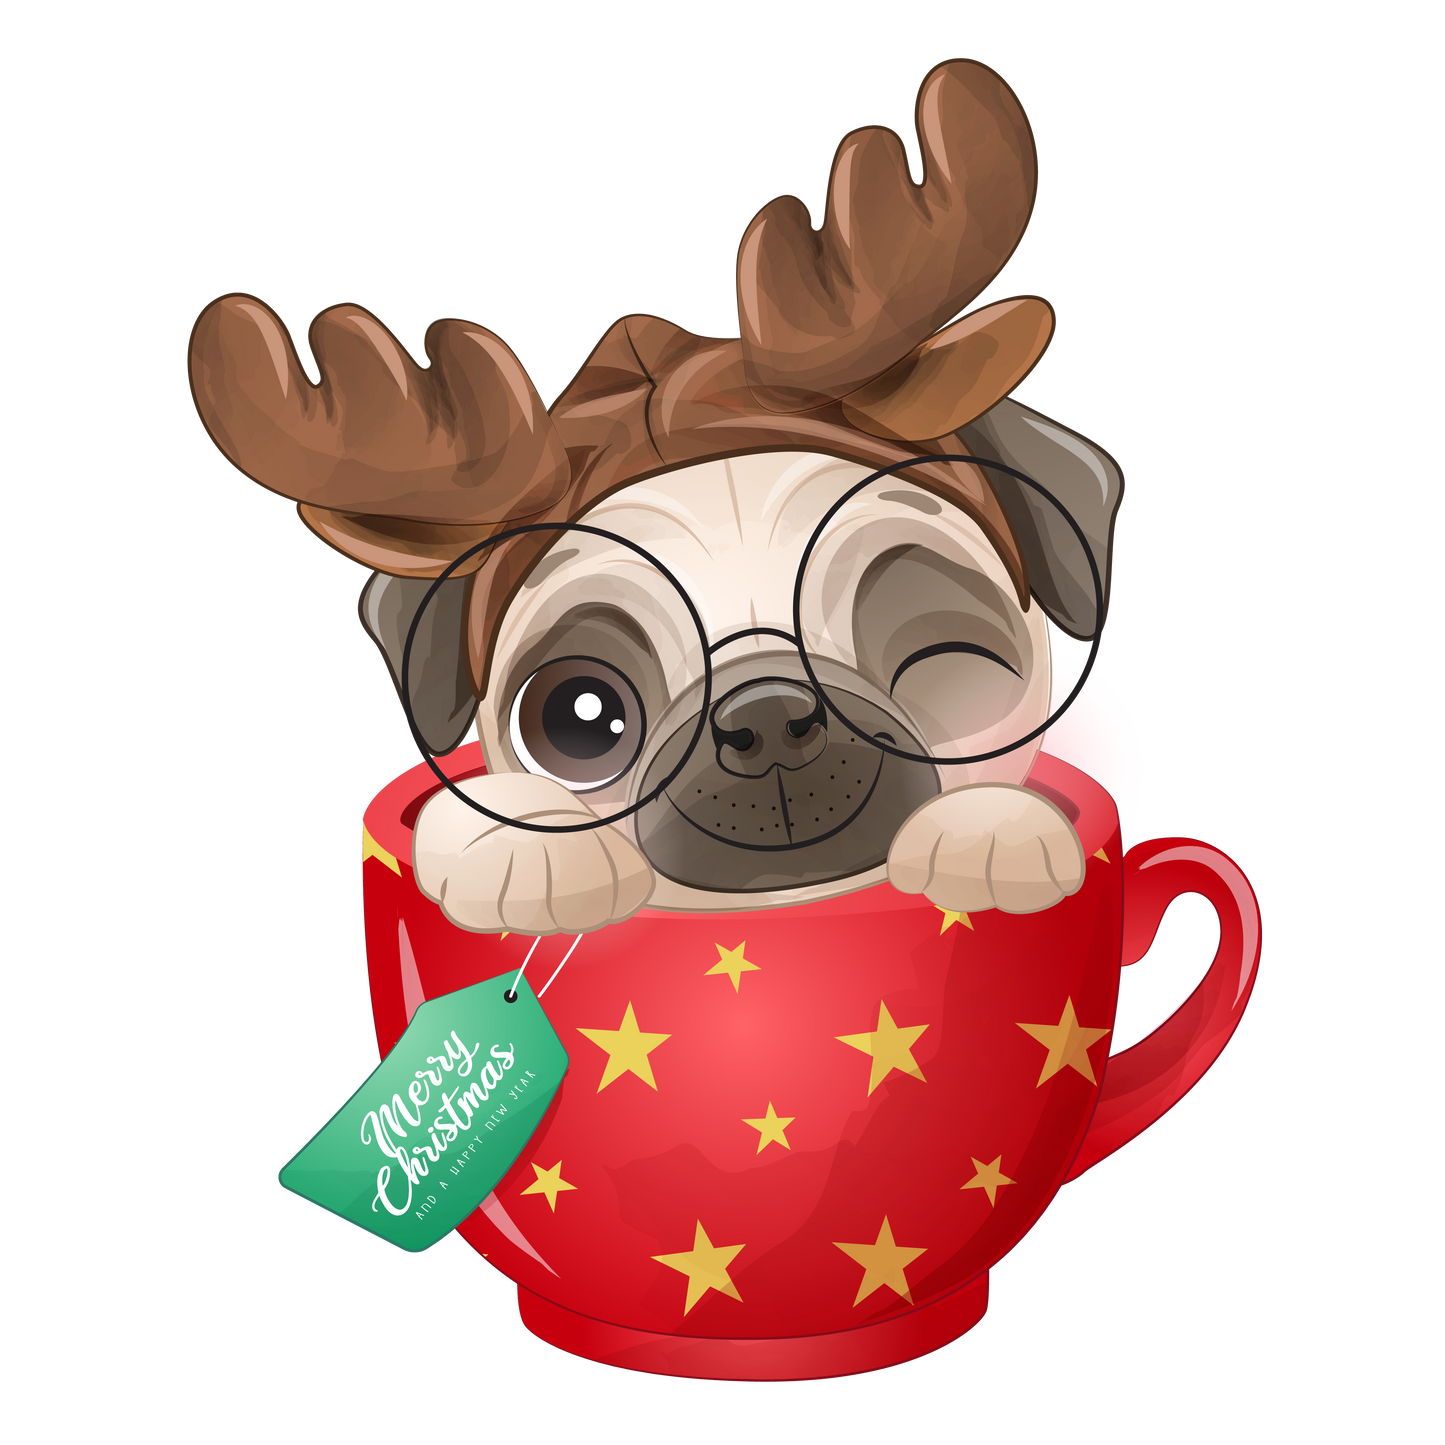 Stickers - Christmas Pug, in Cocoa Mug with Antlers